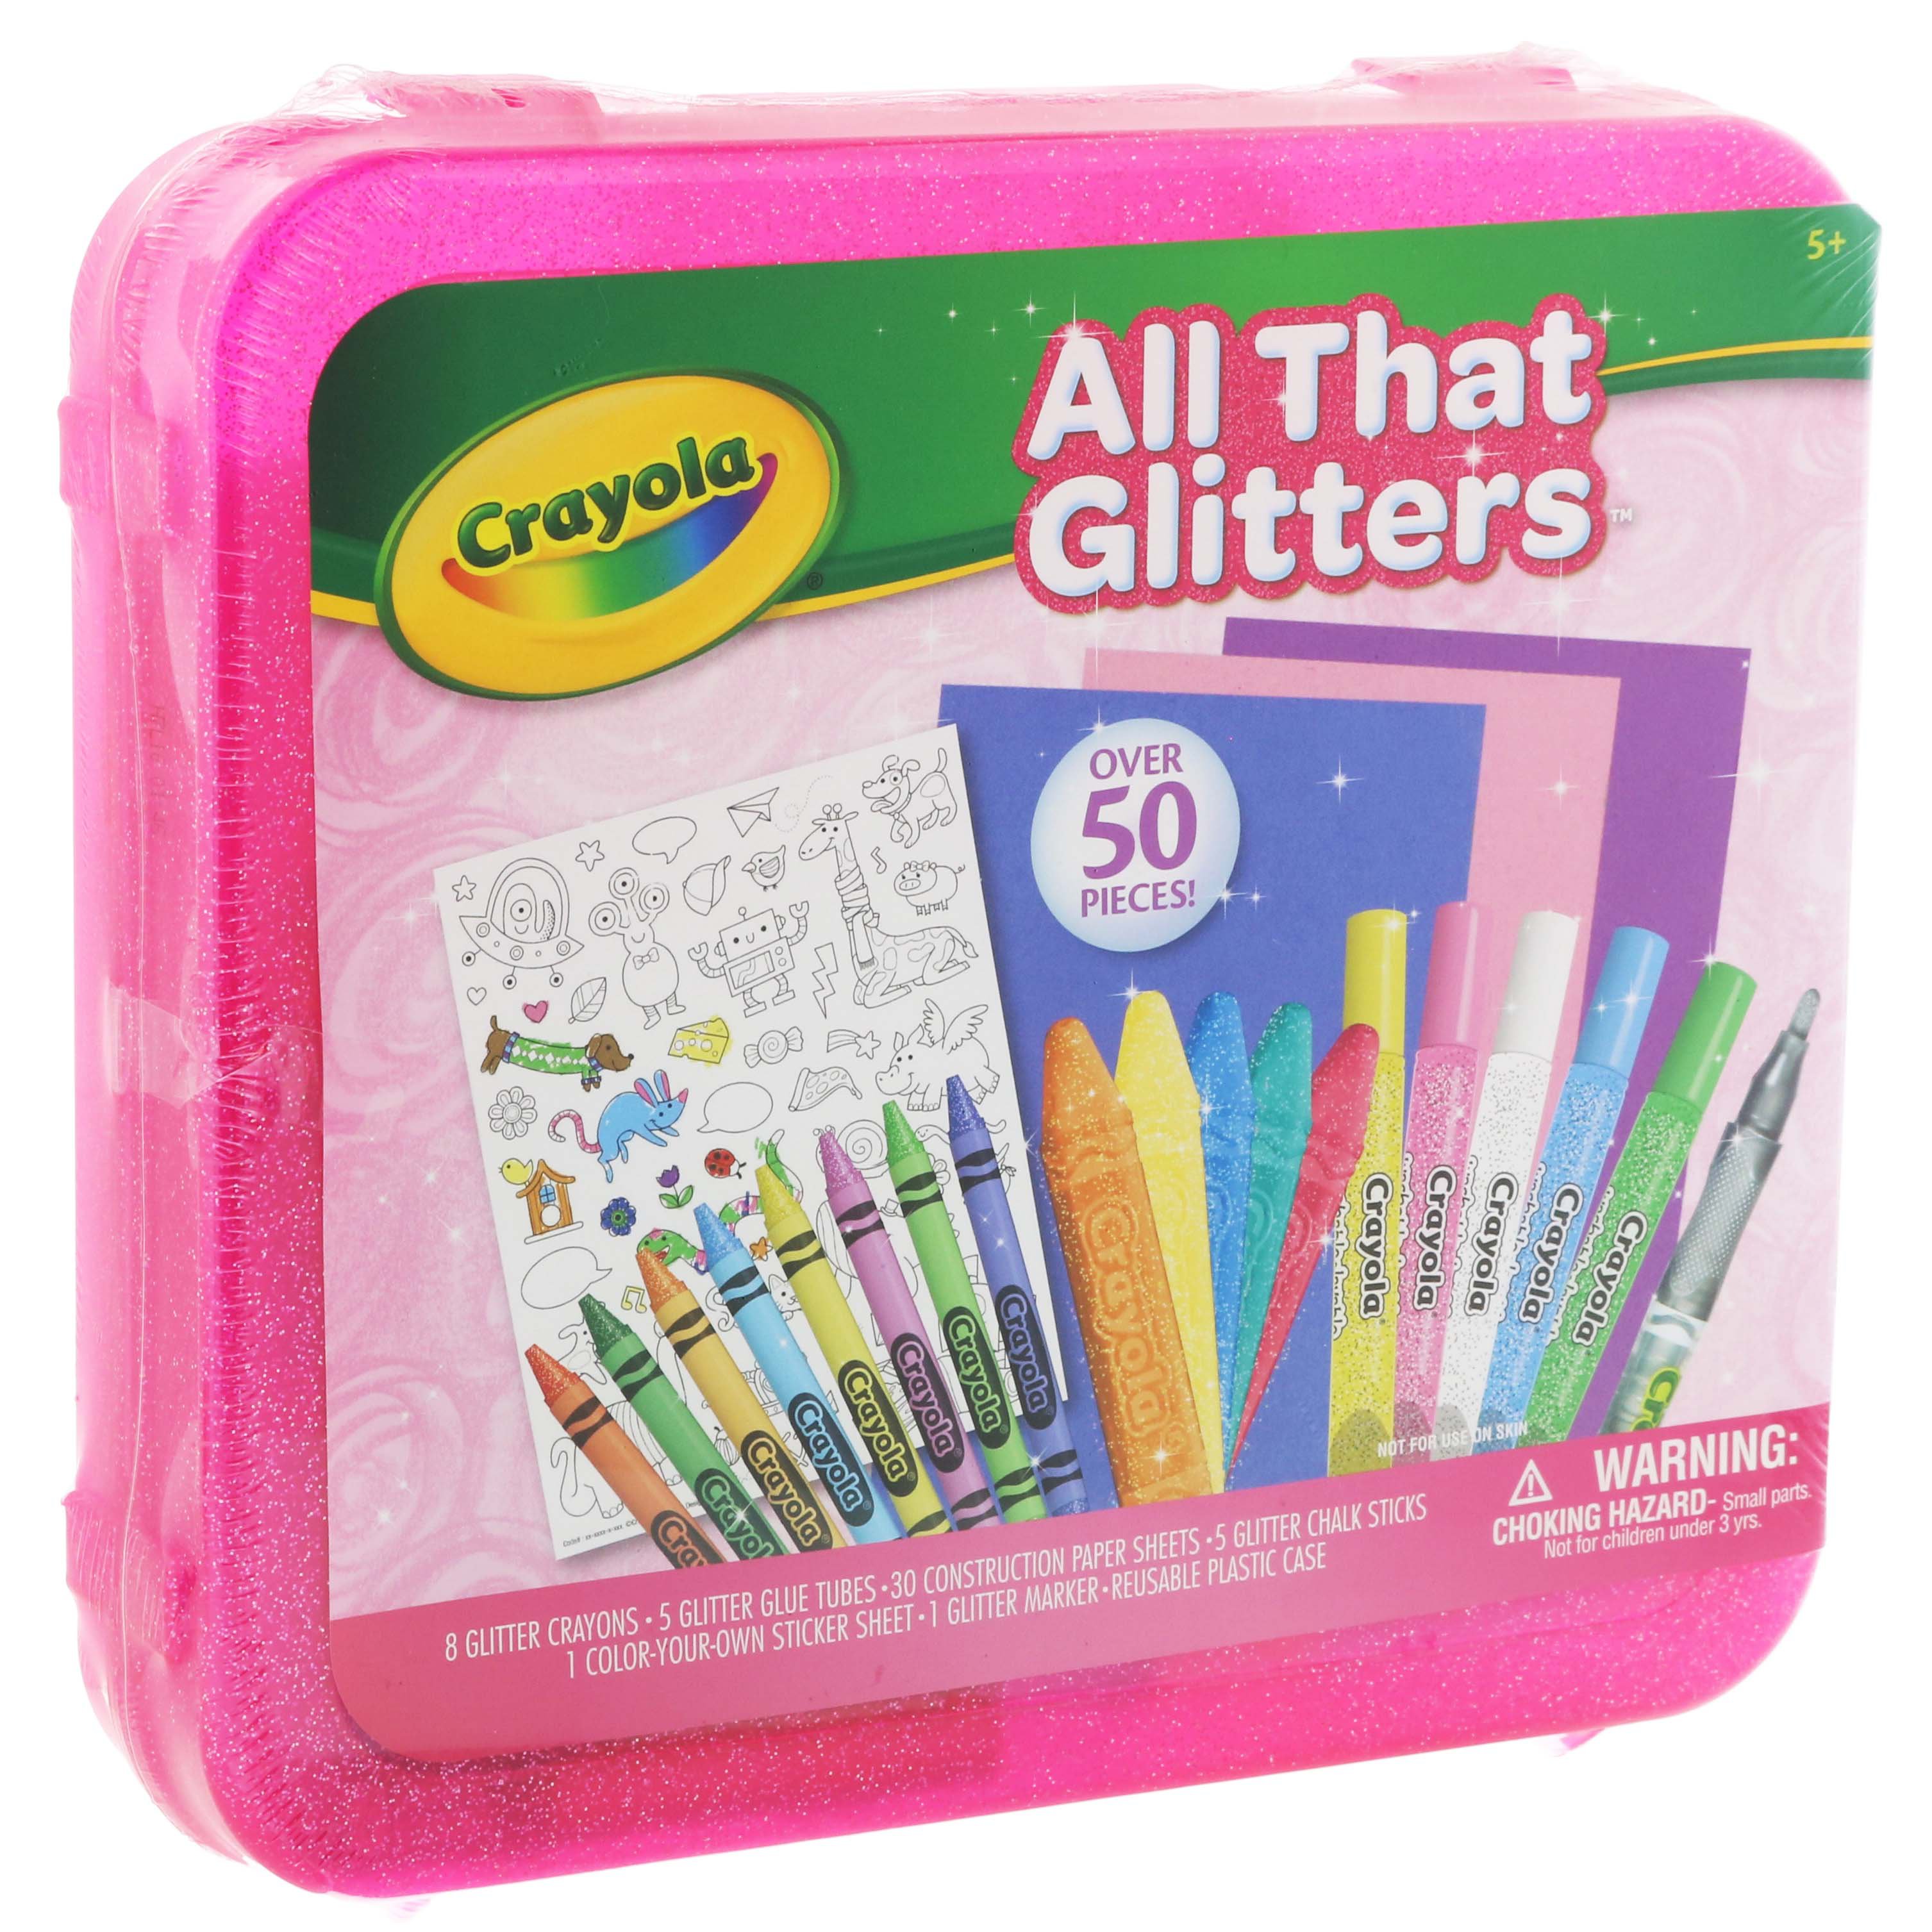 Crayola All That Glitters Case - Shop Kits at H-E-B